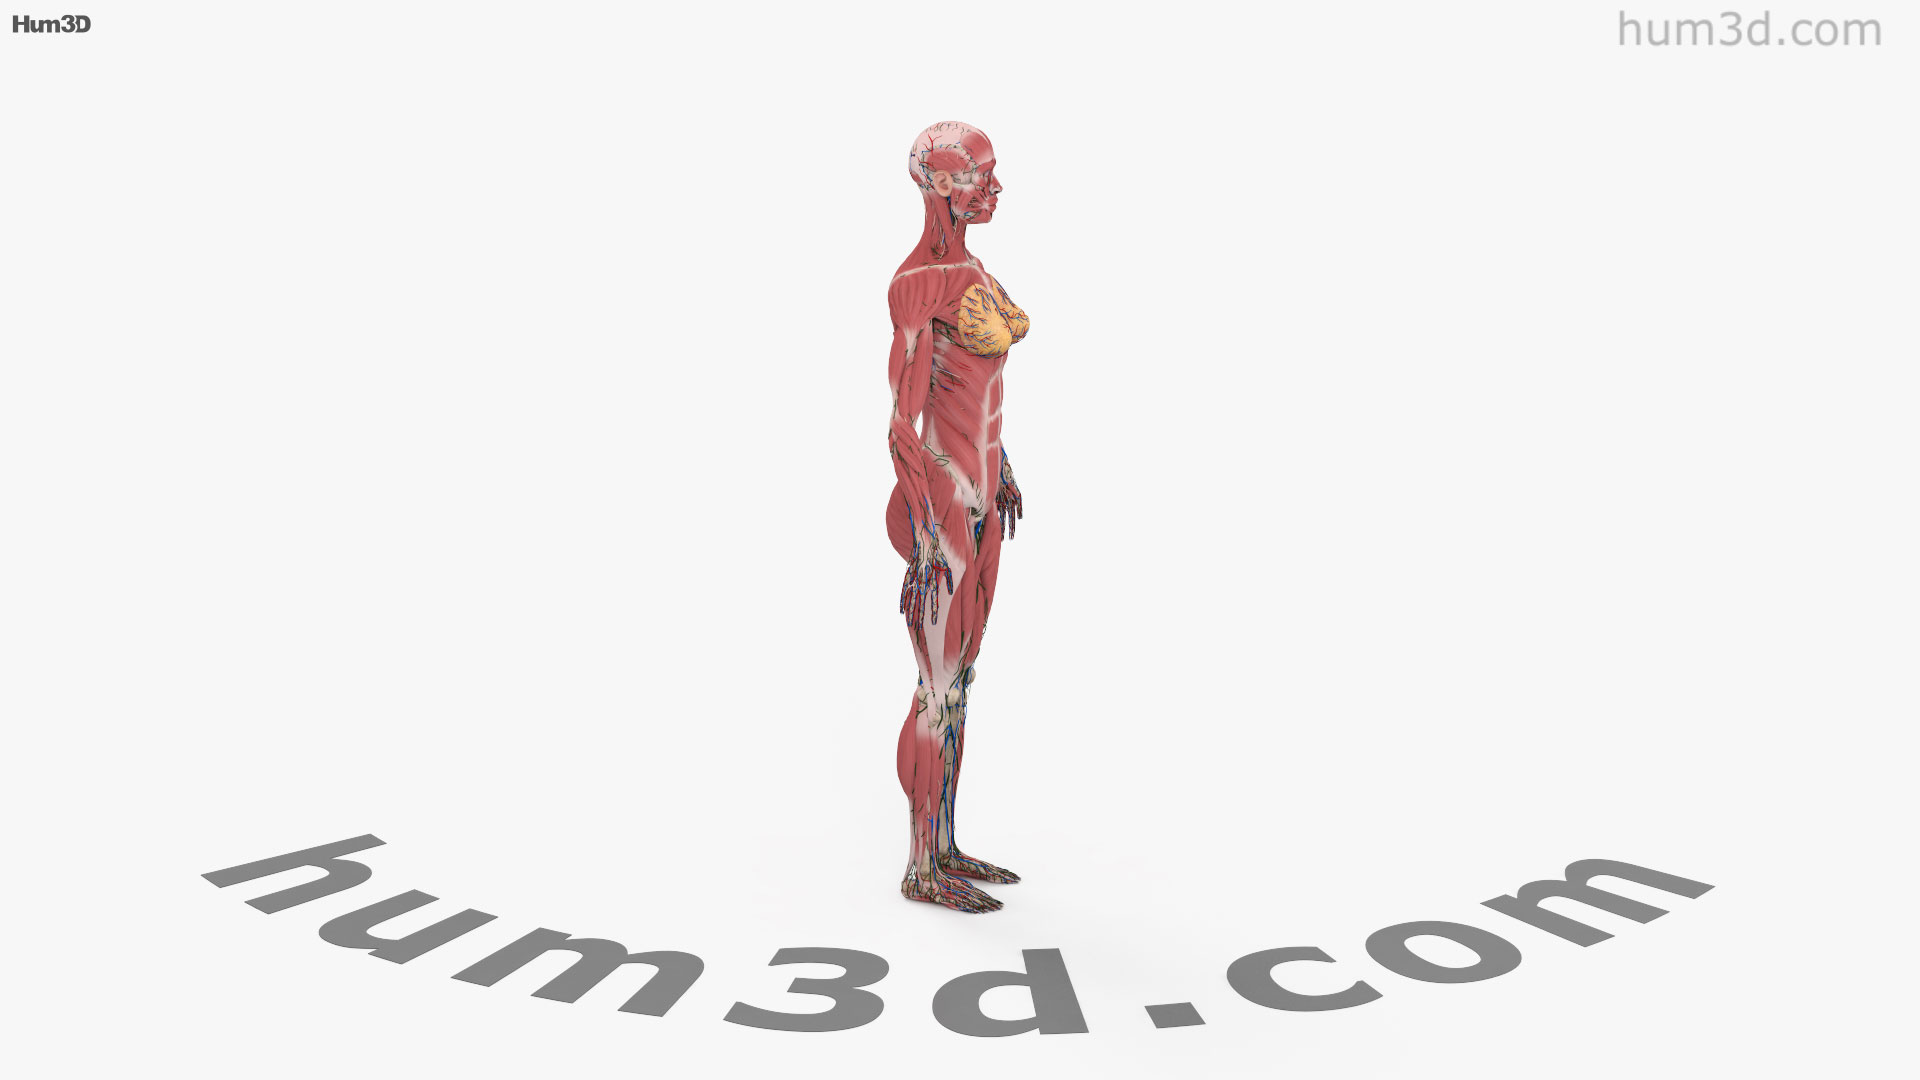 360 View Of Complete Female Anatomy 3d Model Hum3d Store 4104